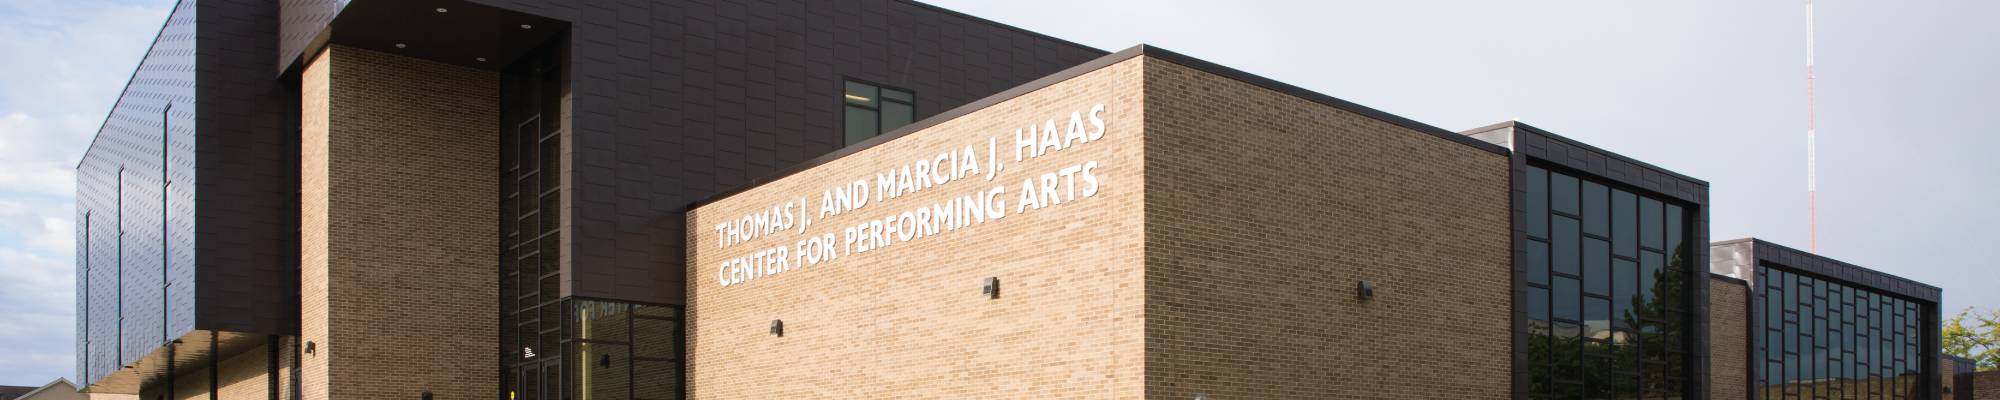 Thomas J. and Marcia J. Haas Center for Performing Arts Learn More page ...